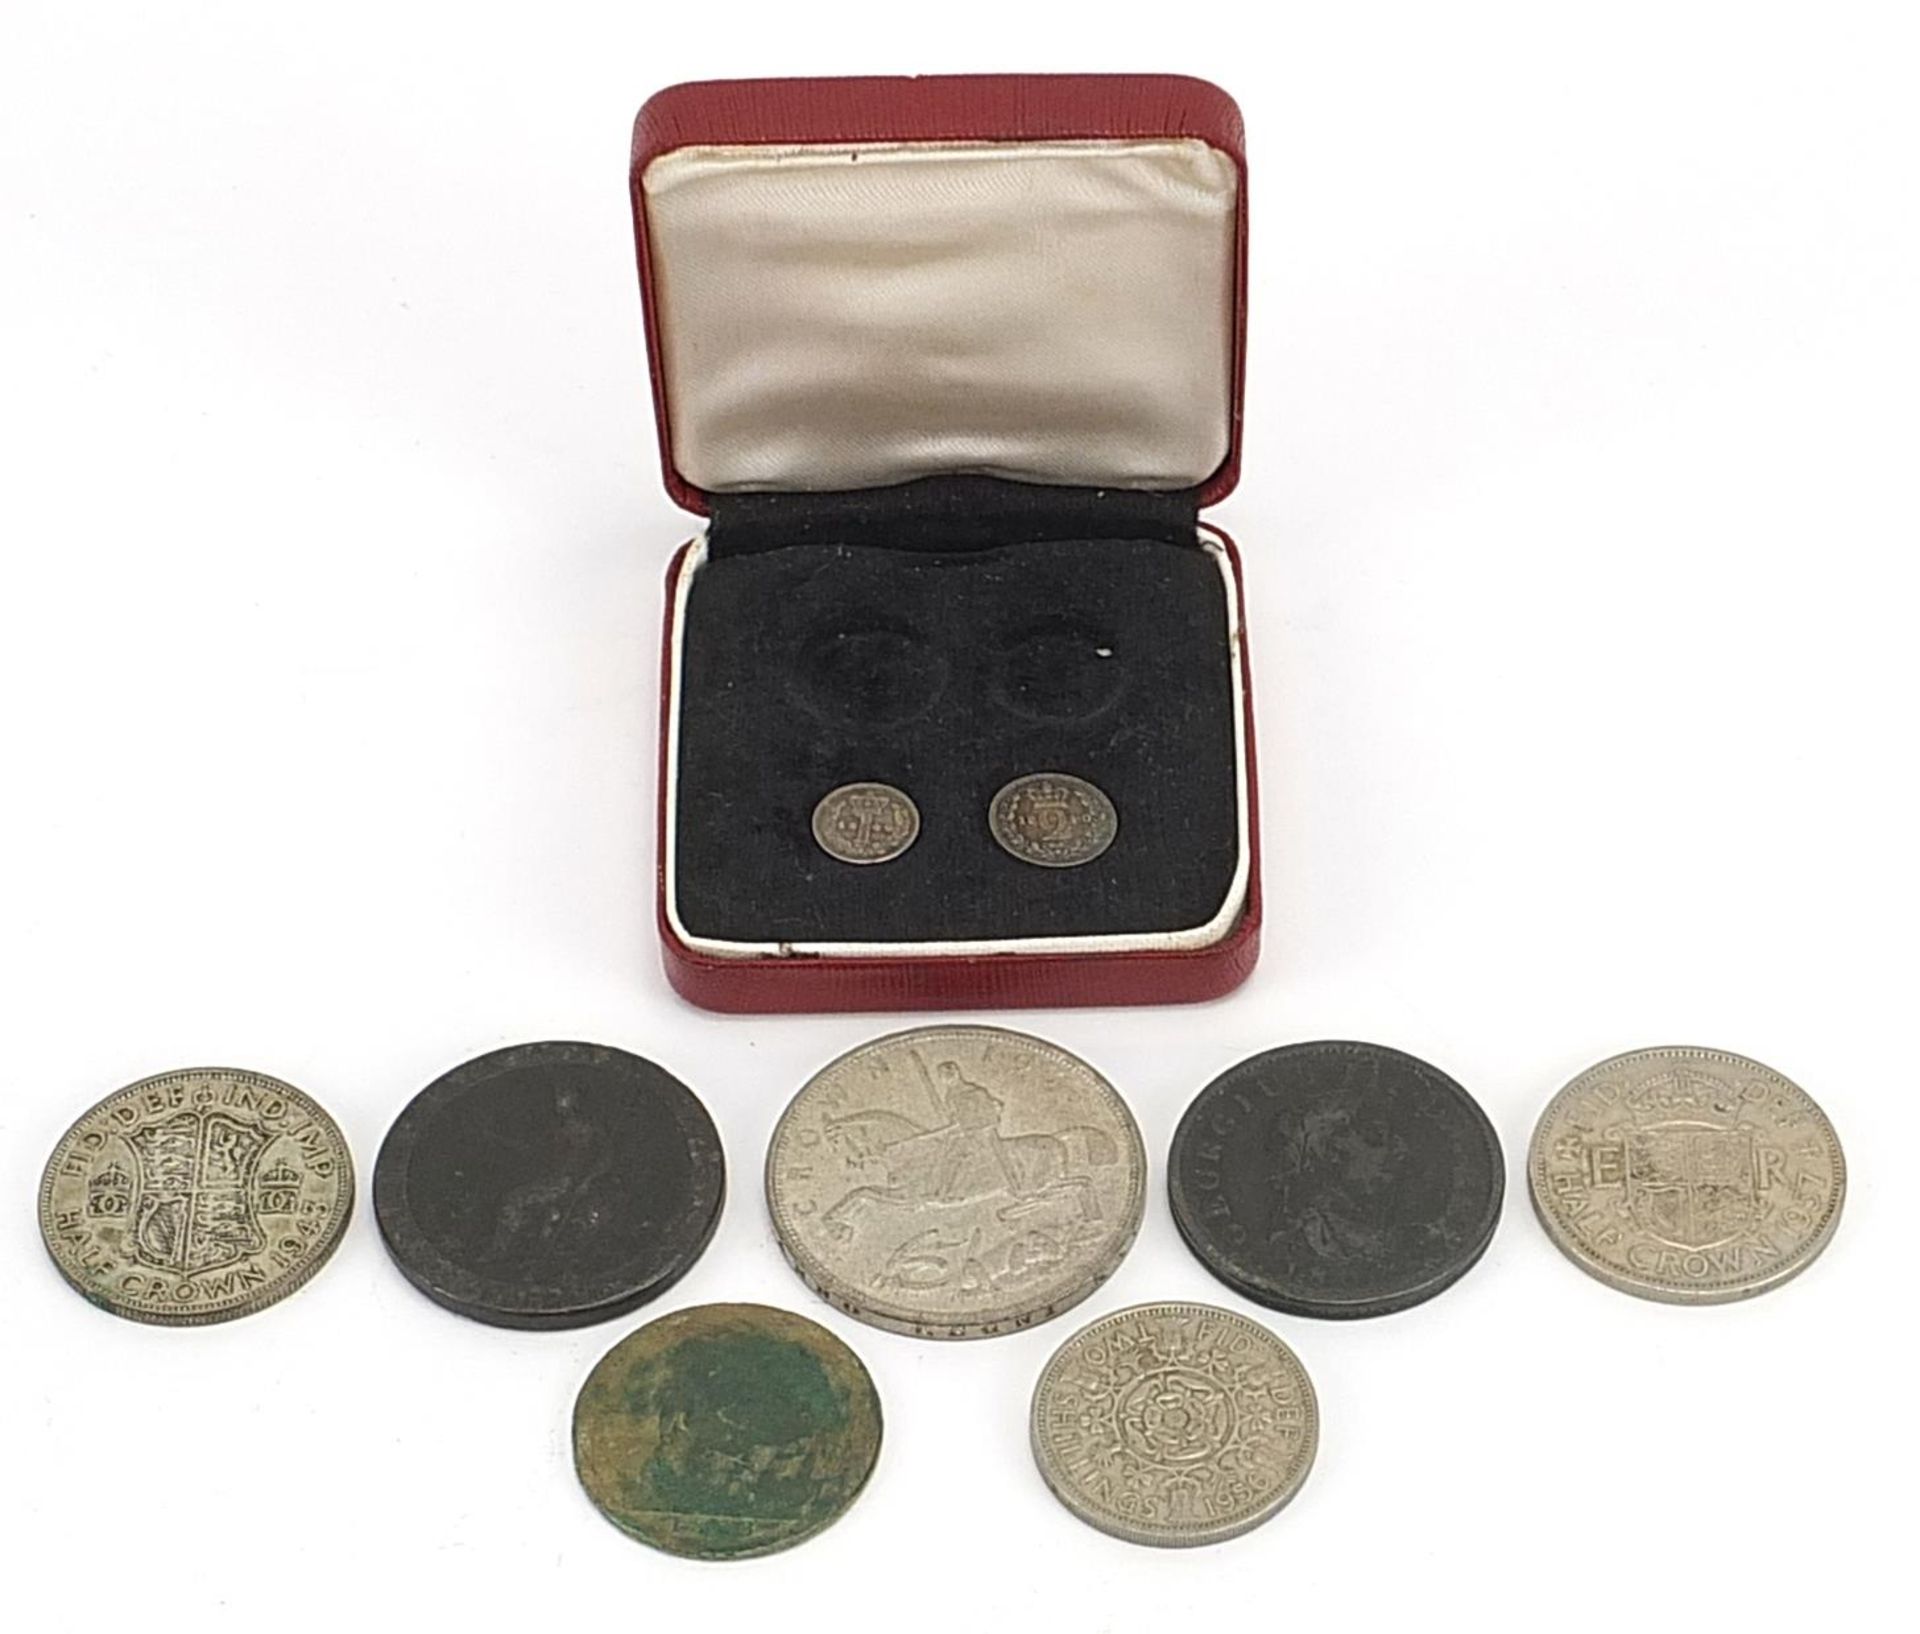 George III and later British coinage including two 1814 maundy coins and 1935 Rocking Horse crown